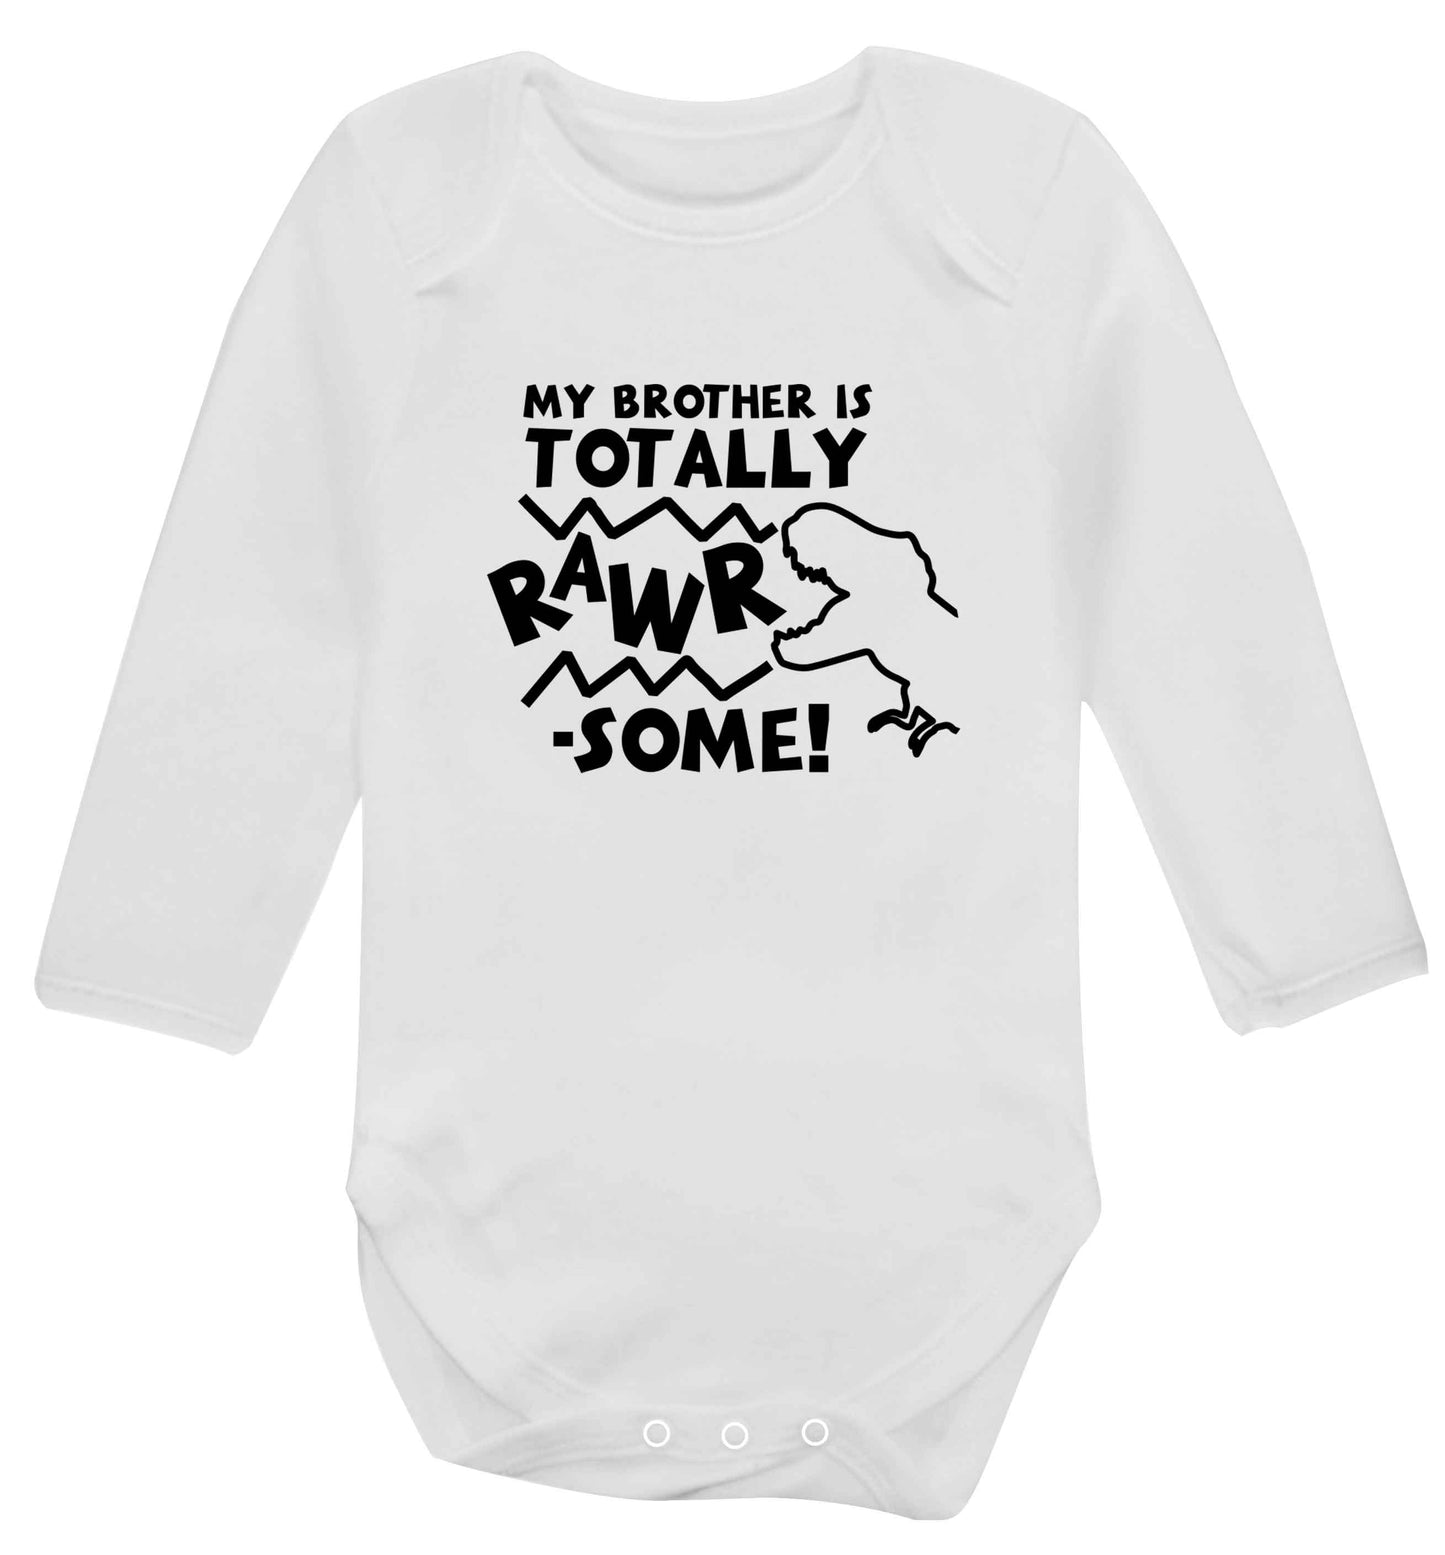 My brother is totally rawrsome baby vest long sleeved white 6-12 months